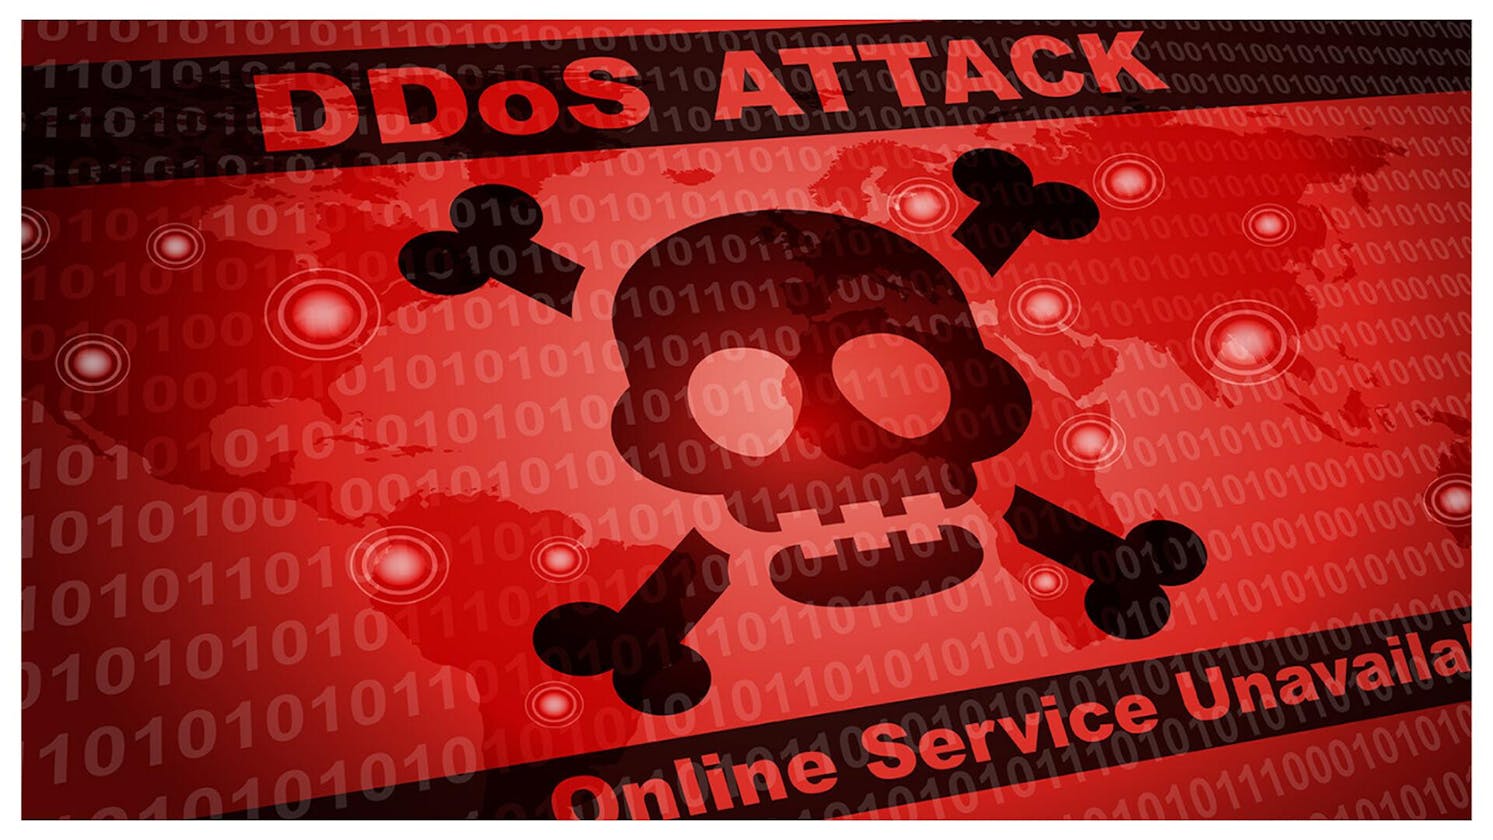 DDOS attack using GoldenEye in Kali Linux and Termux.